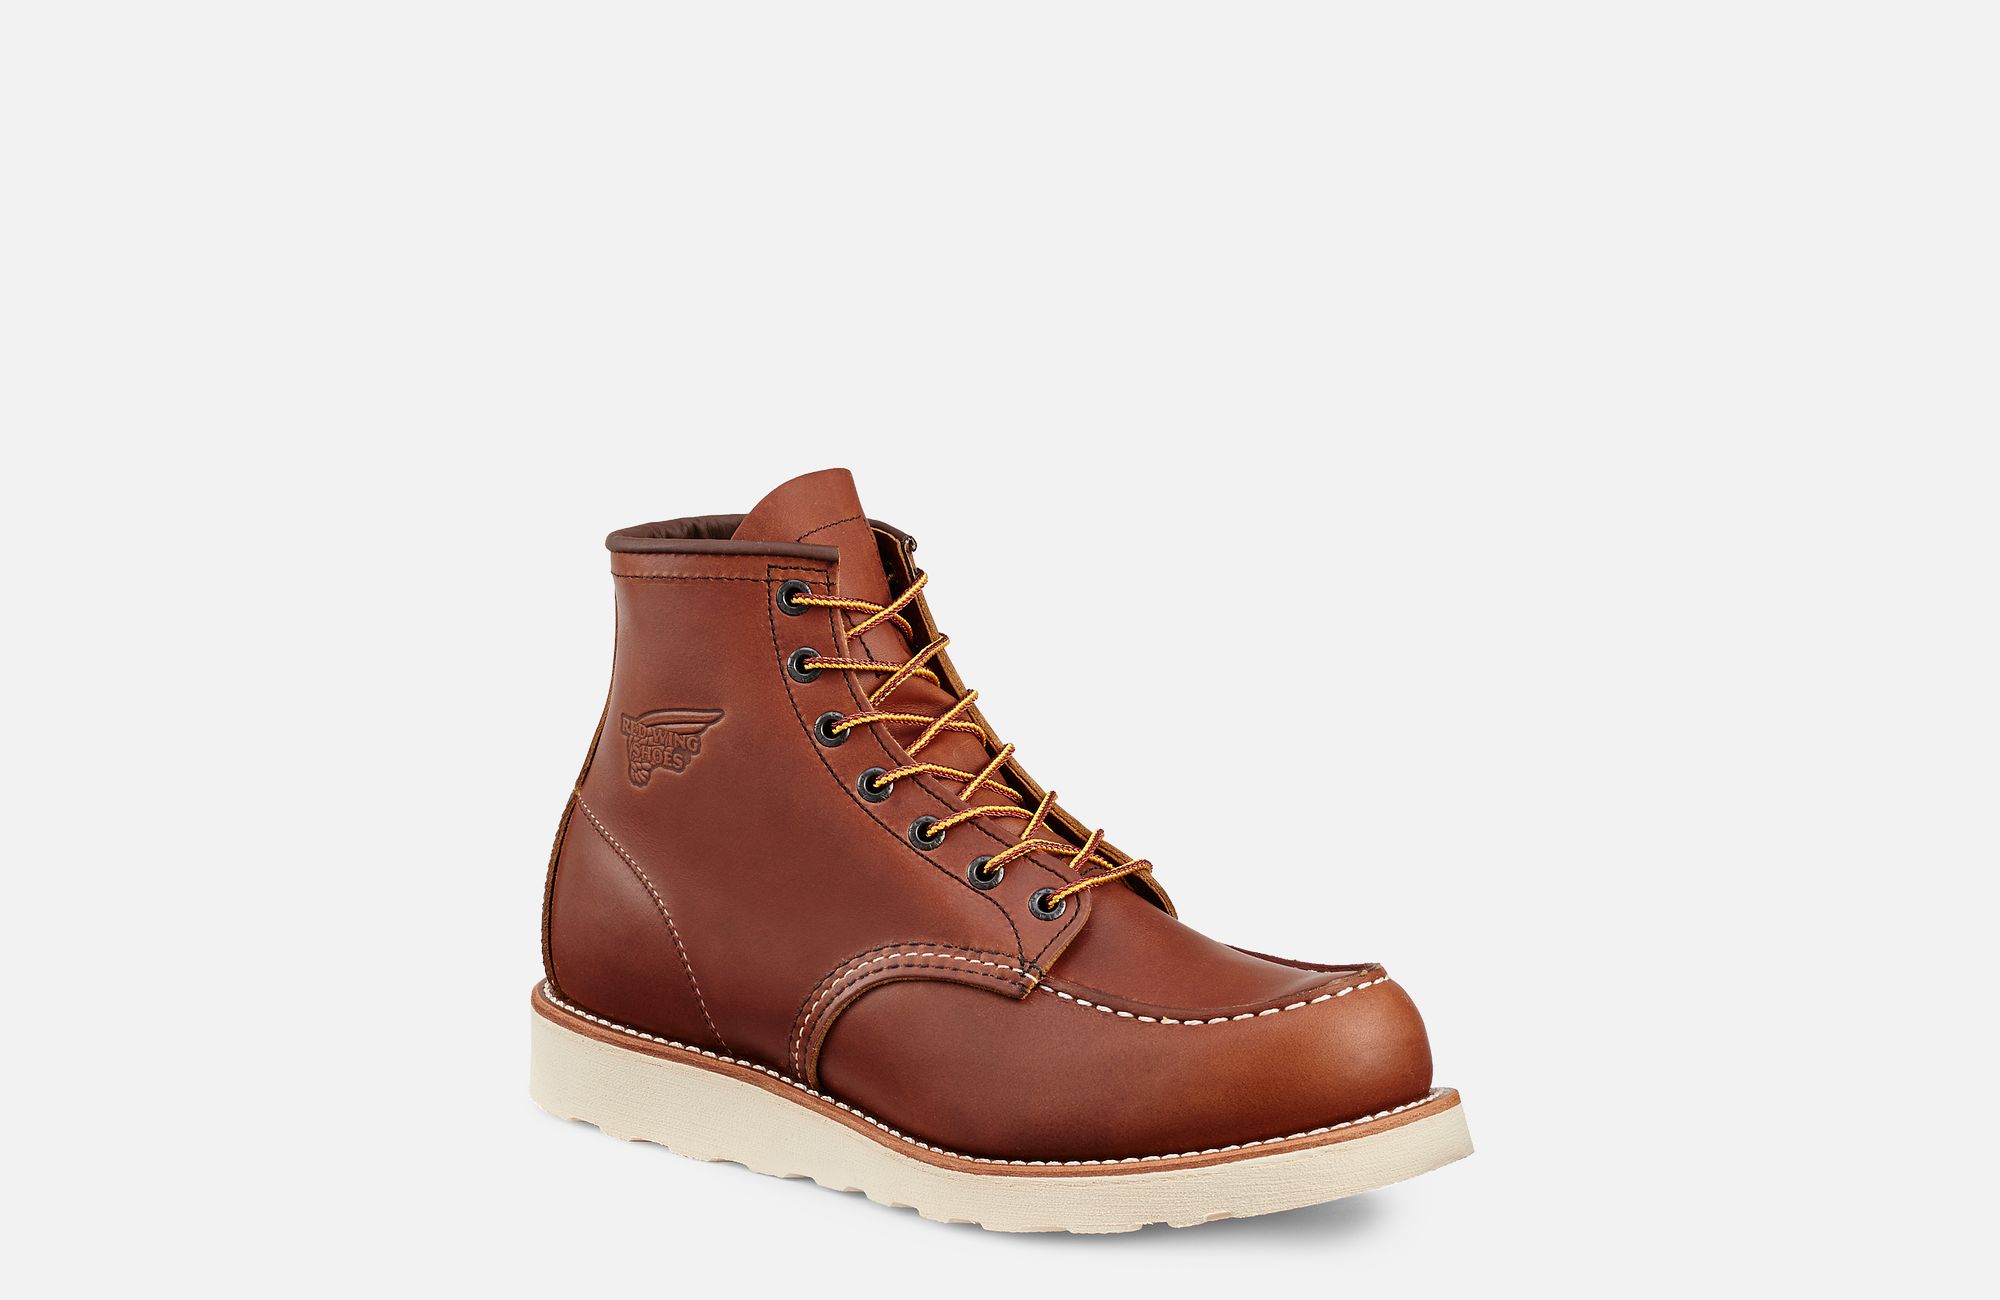 Grappig Knipoog draai Traction Tred | Red Wing